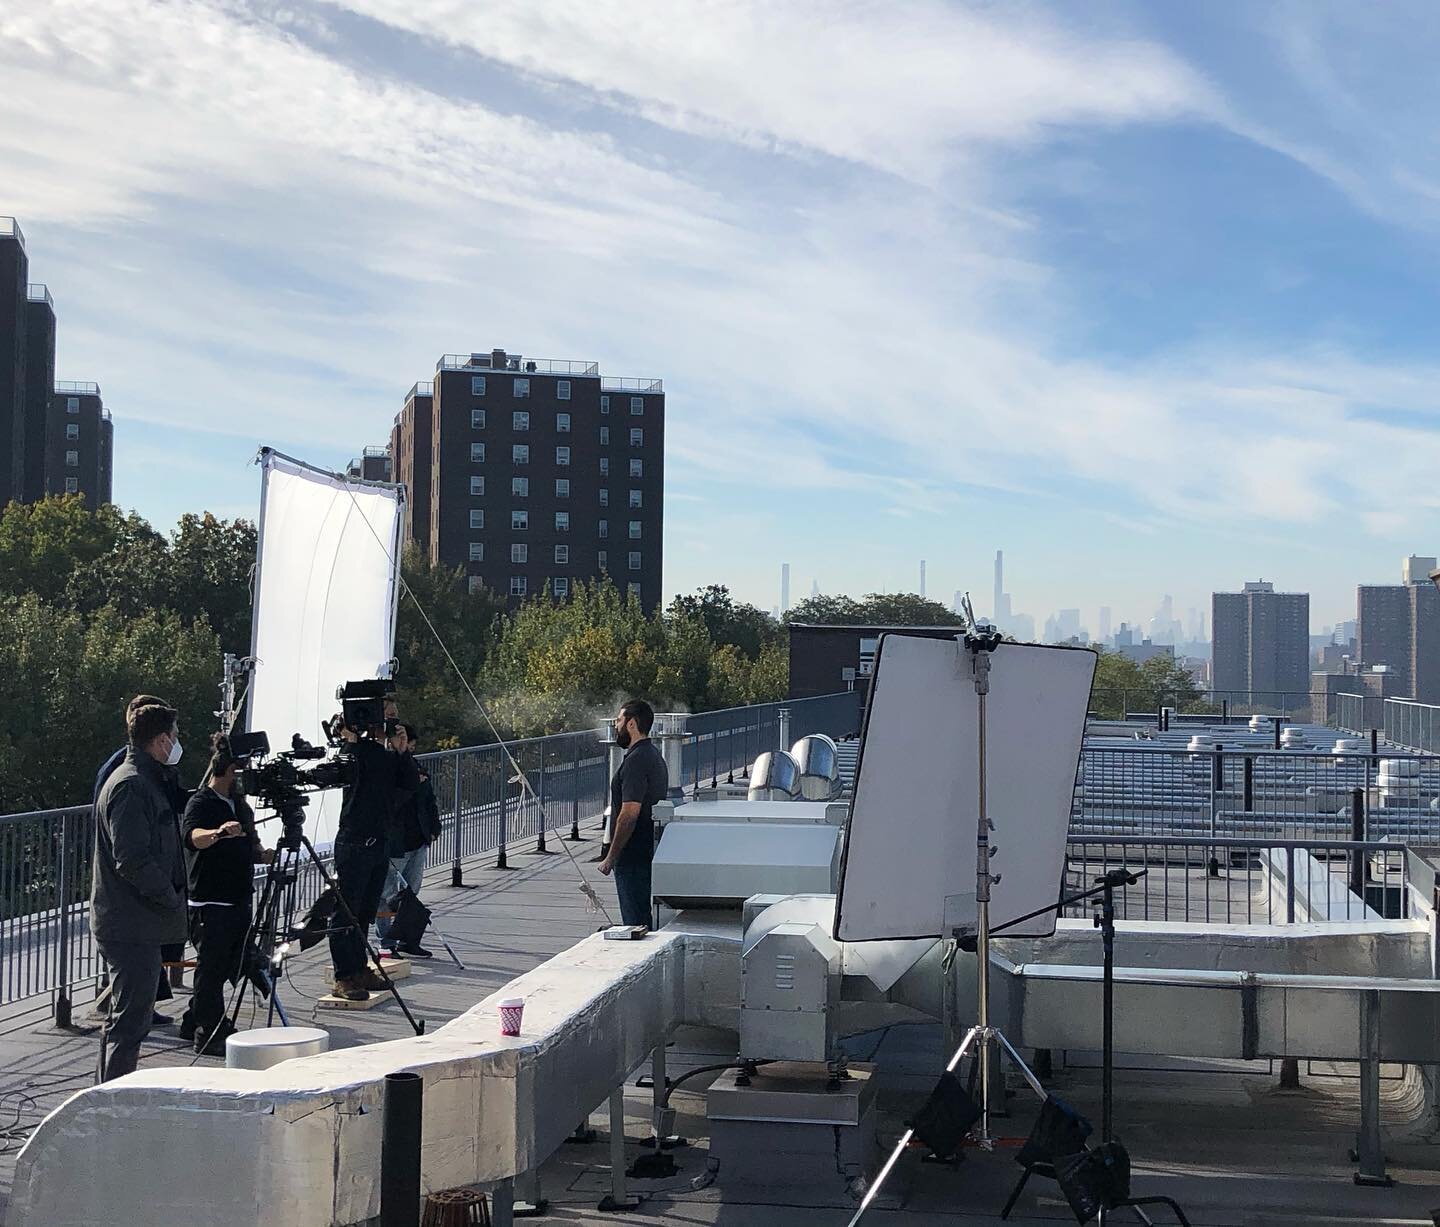 Rooftop shooting with a great crew and some natural light.
#gaffer #grip #lighting #setlighting #8x8 # #bounceboard #griplife #setlife #rooftopviews #bronx #masklife #wearamask #washyourhands 

@lights_camera_manny @tom_fanelle @geoffcelis @redsummit